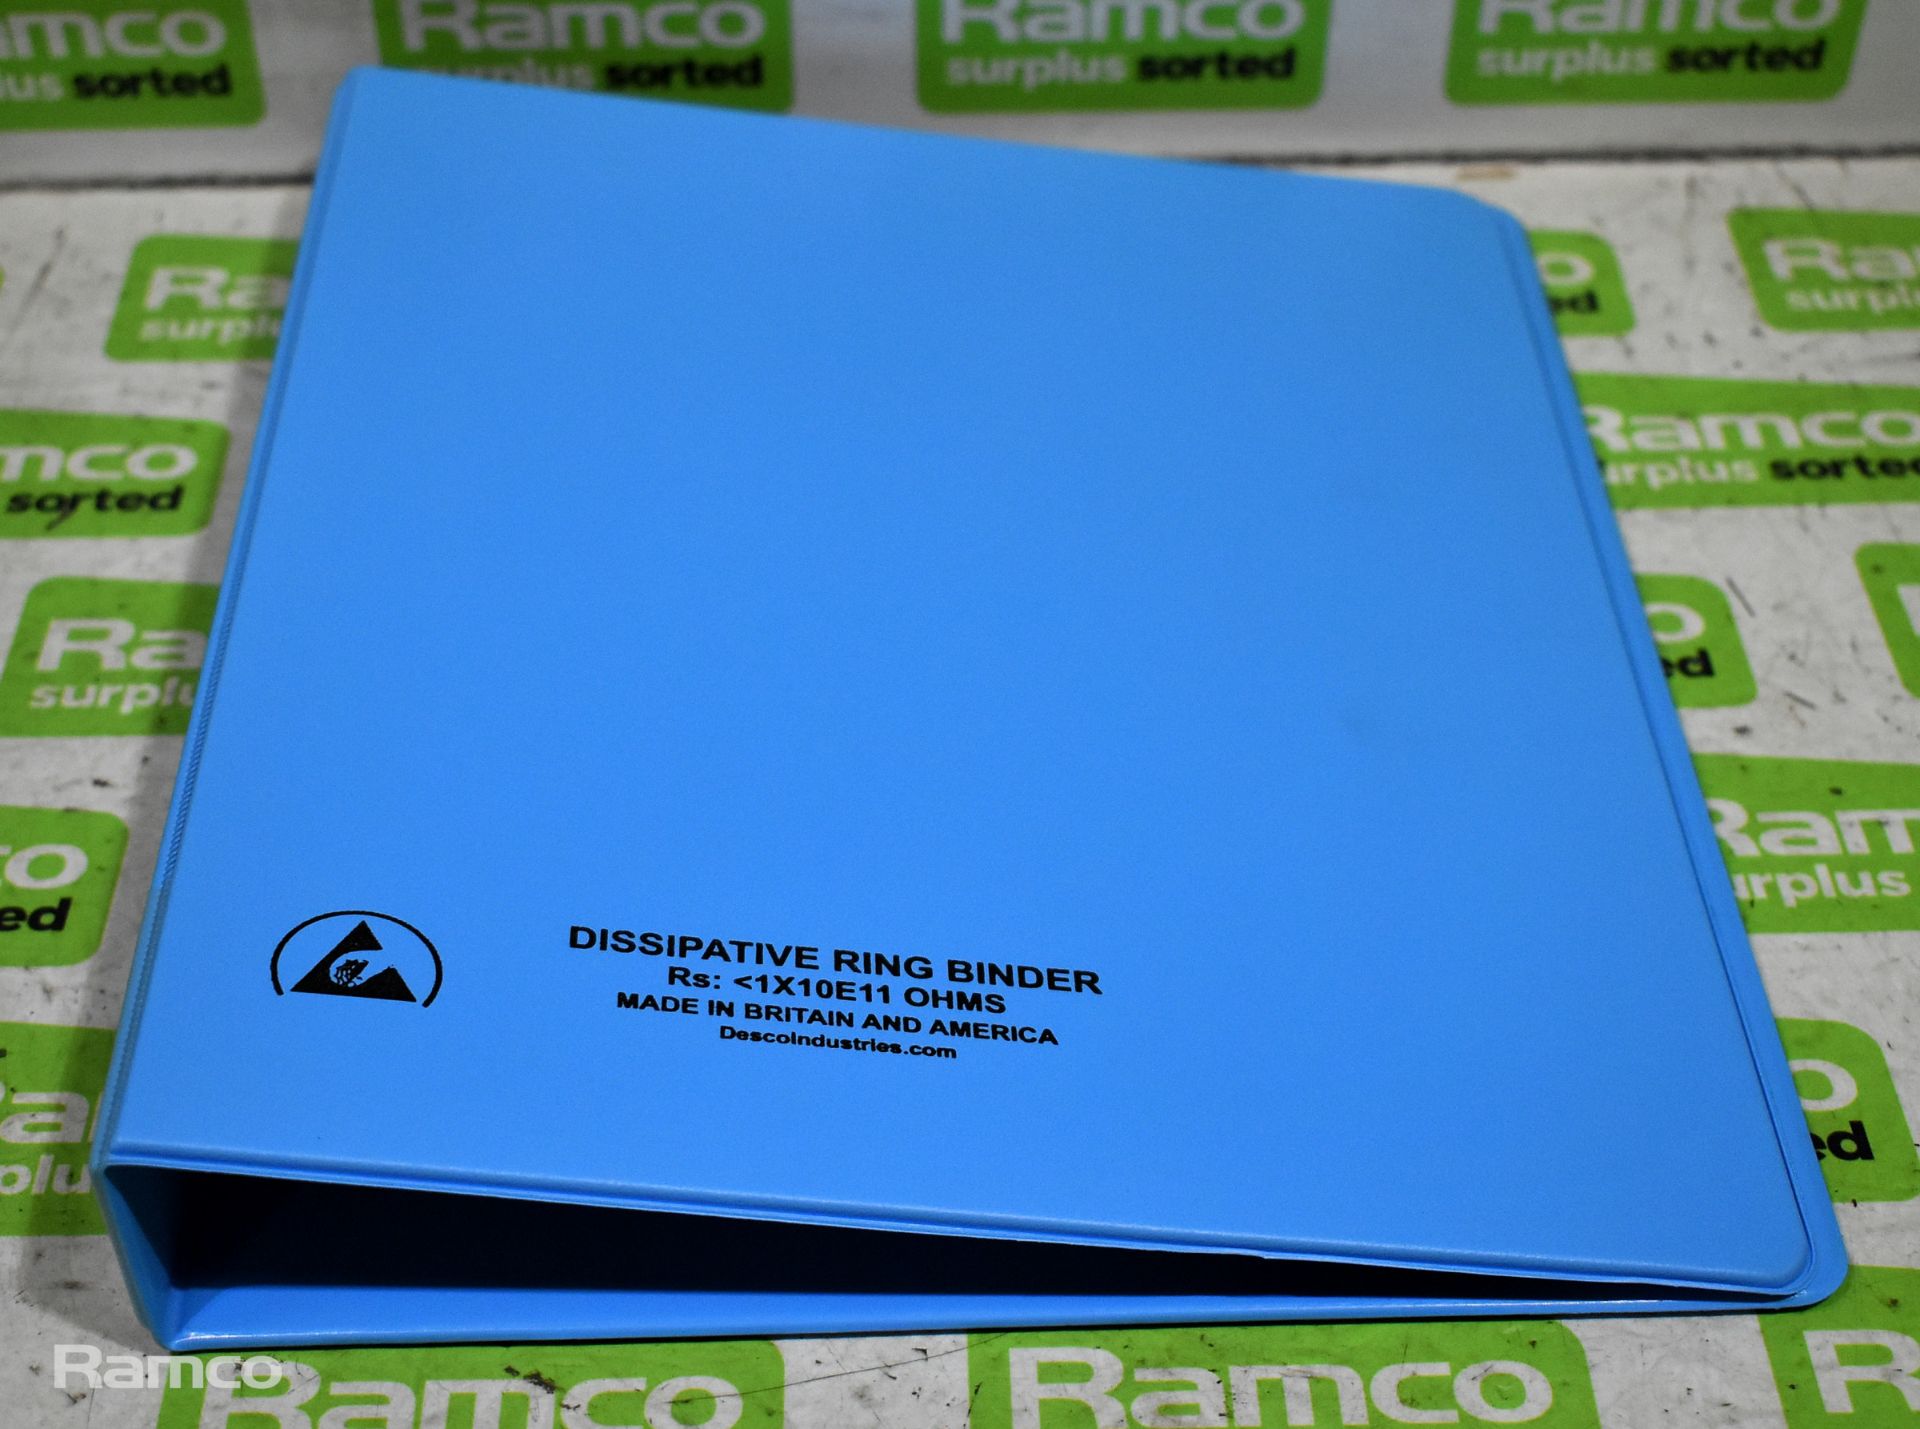 33x Dissipative A4 ring binder 2x 25mm rings - Image 3 of 5